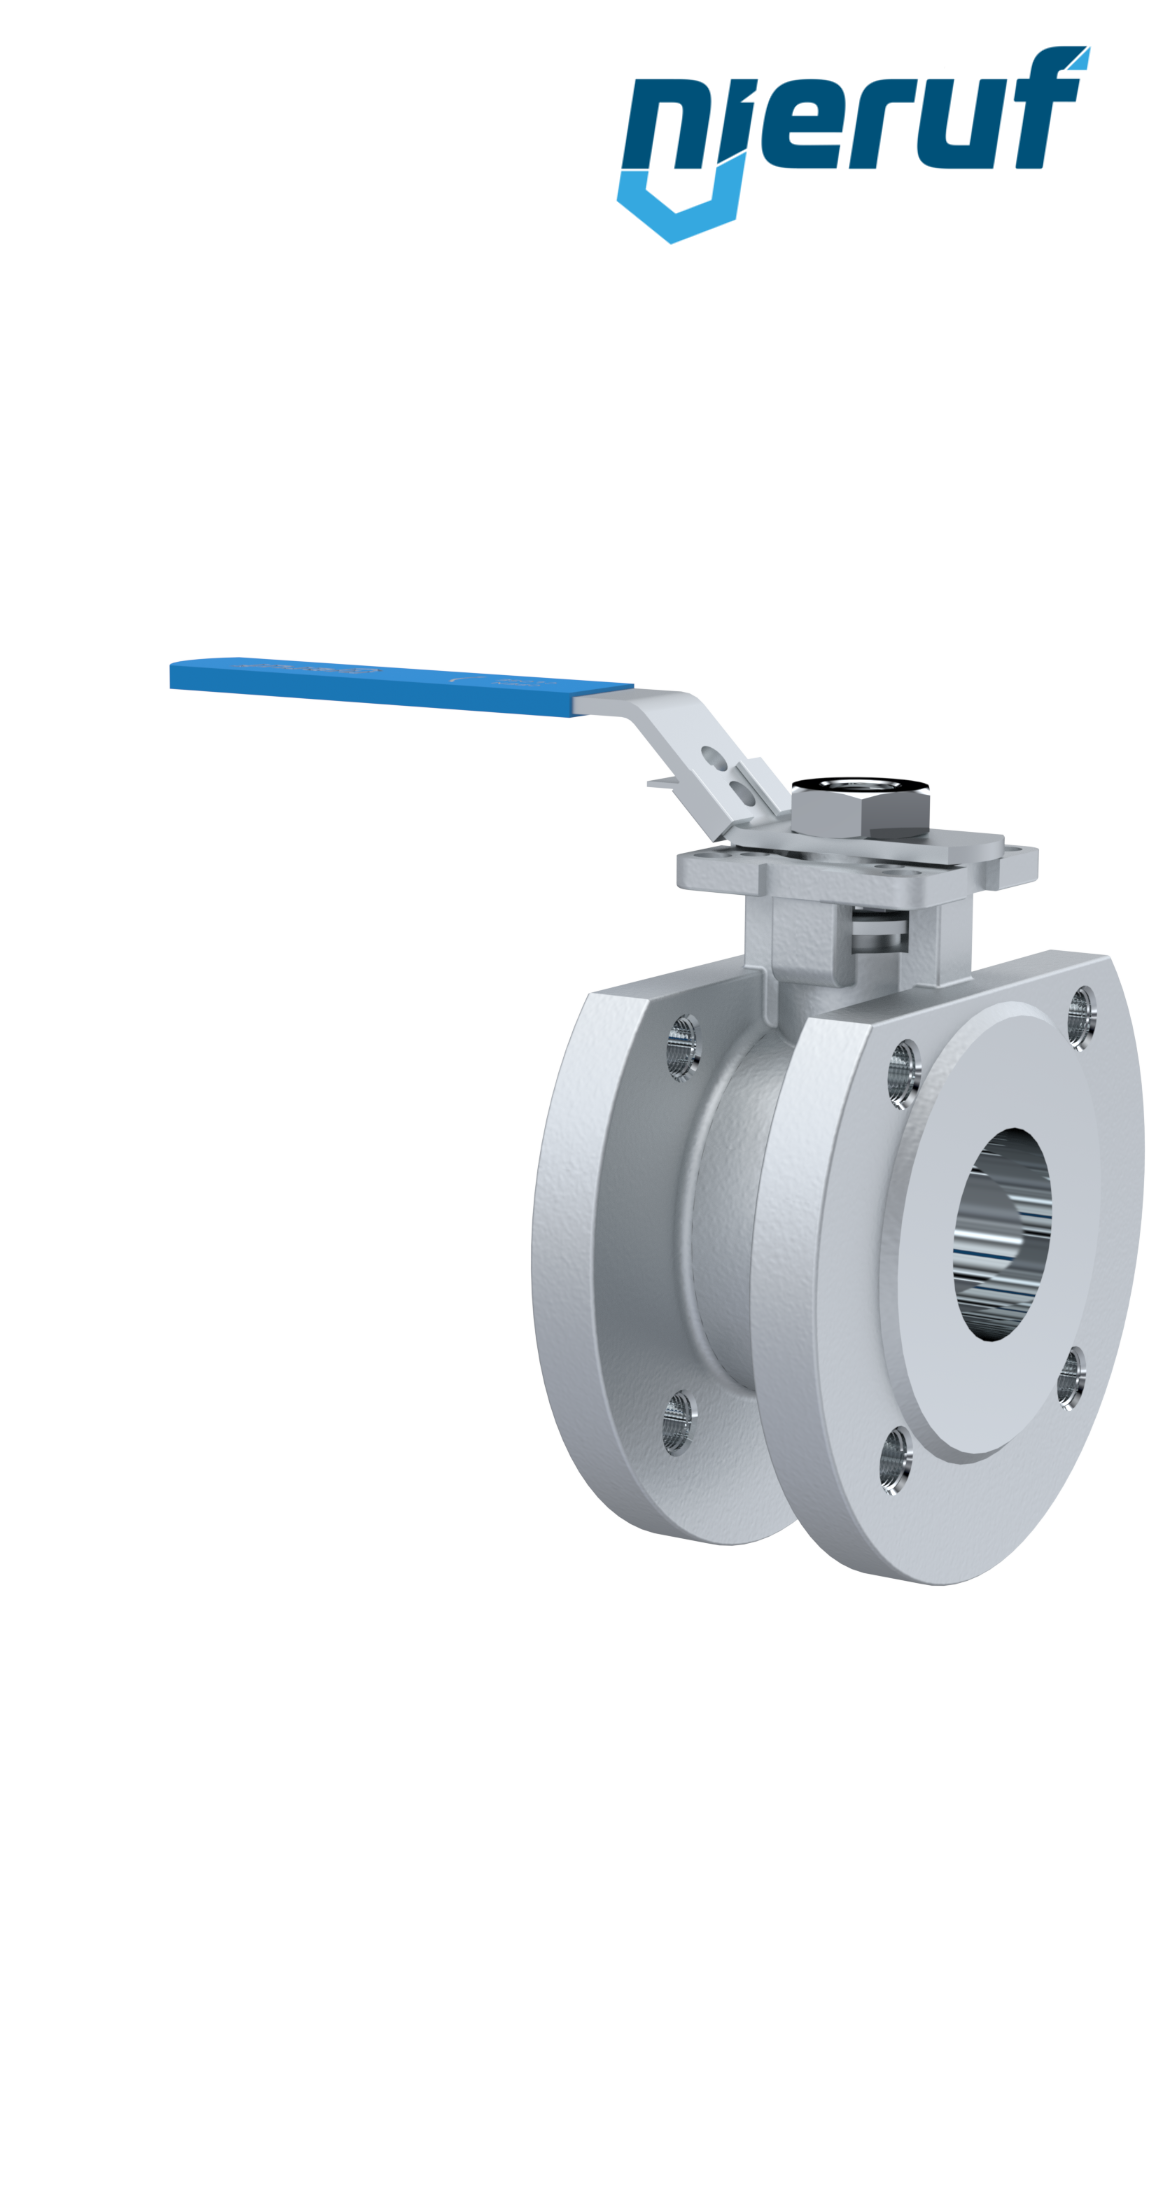 Compact ball valve DN20 PN16 FK04 stainless steel 1.4408